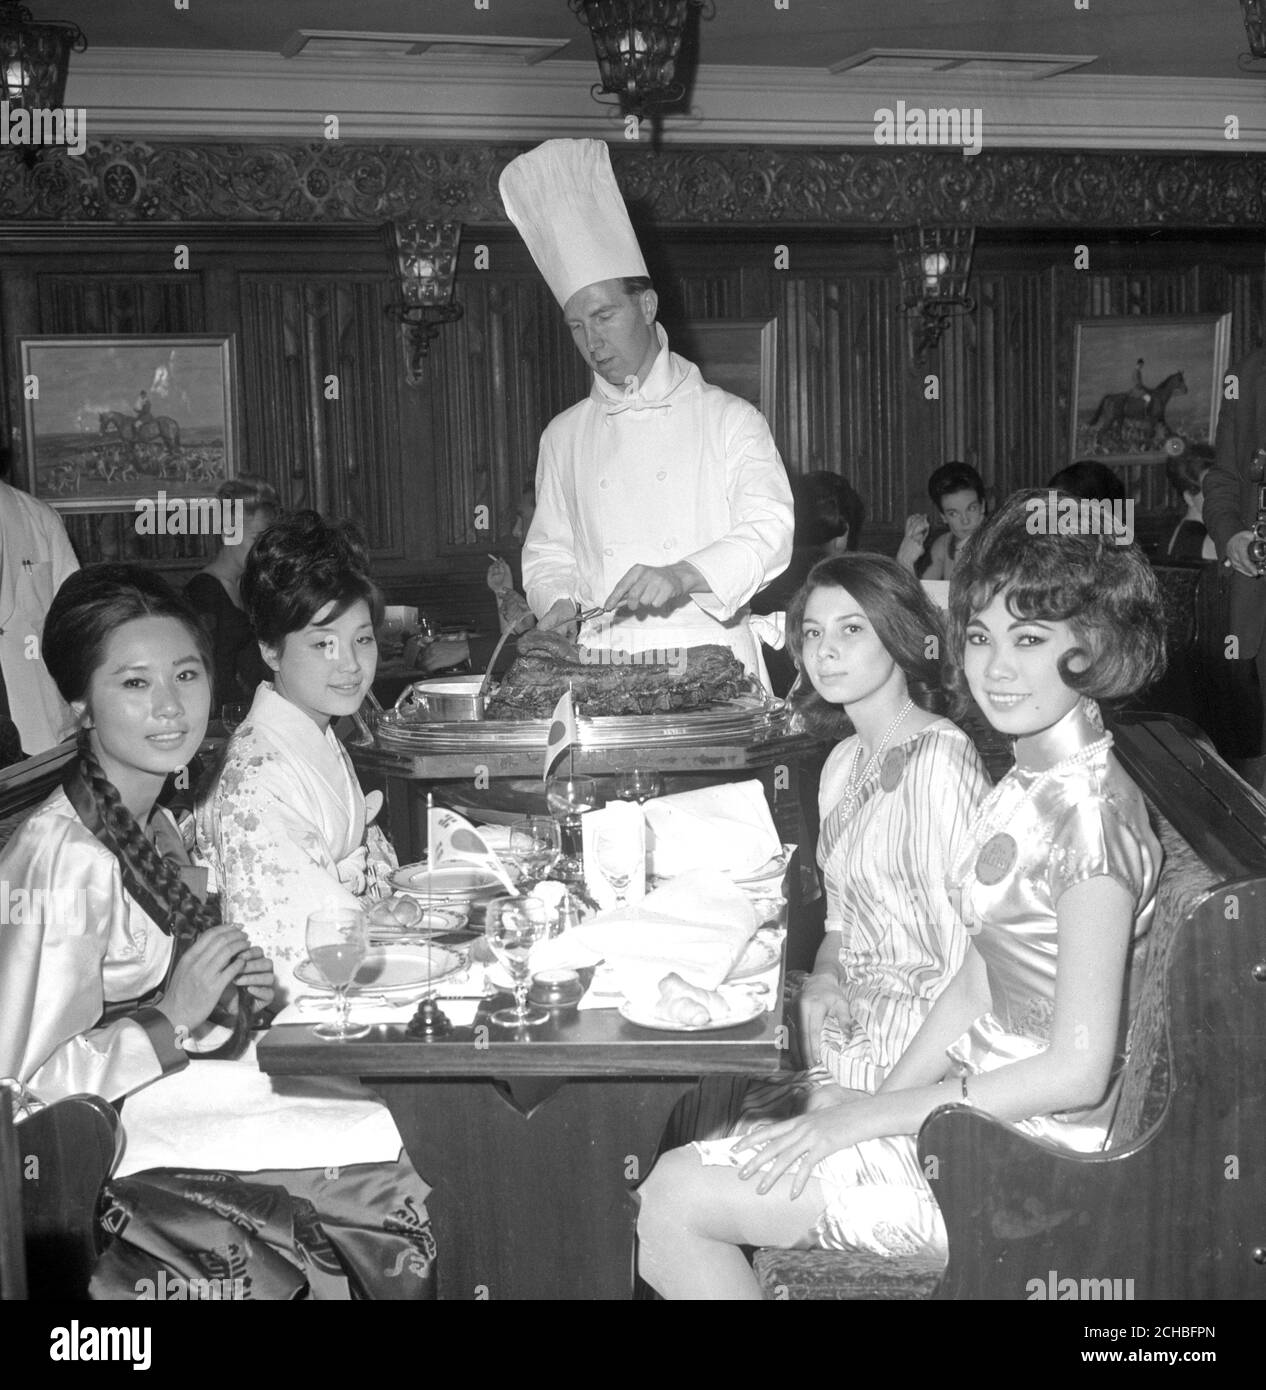 Miss World contestants sample a roast beef dish served by chef Barry Crossley at the Baron of Beef restaurant in Gutter Lane, London. (l-r) Miss Korea Keum-Shil Choi, 22, Miss Japan Miyako Harada, 20, Miss Ceylon Jennifer Fonseka, 18, and Miss Malaysia Catherine Loh, 19. Stock Photo